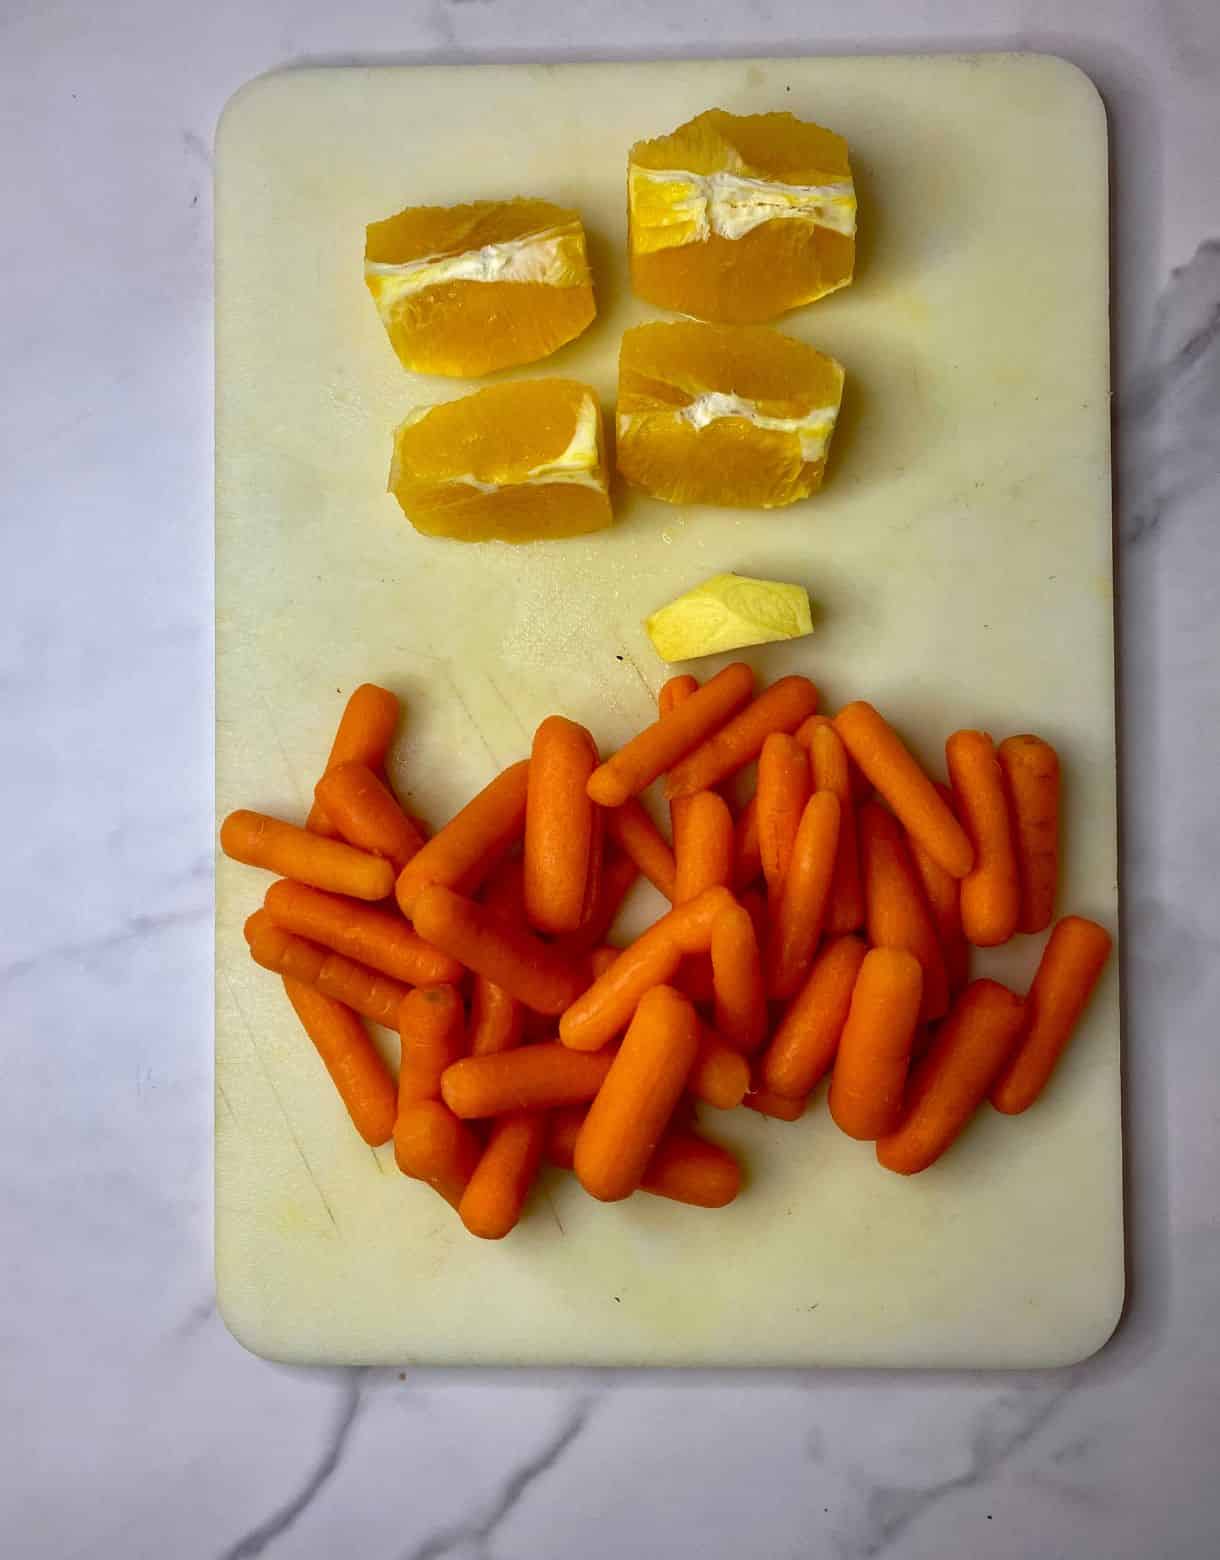 Ingredients prepped for Carrot Orange Ginger Juice. Peeled carrots, peeled chunk of ginger, an orange peeled and quartered.